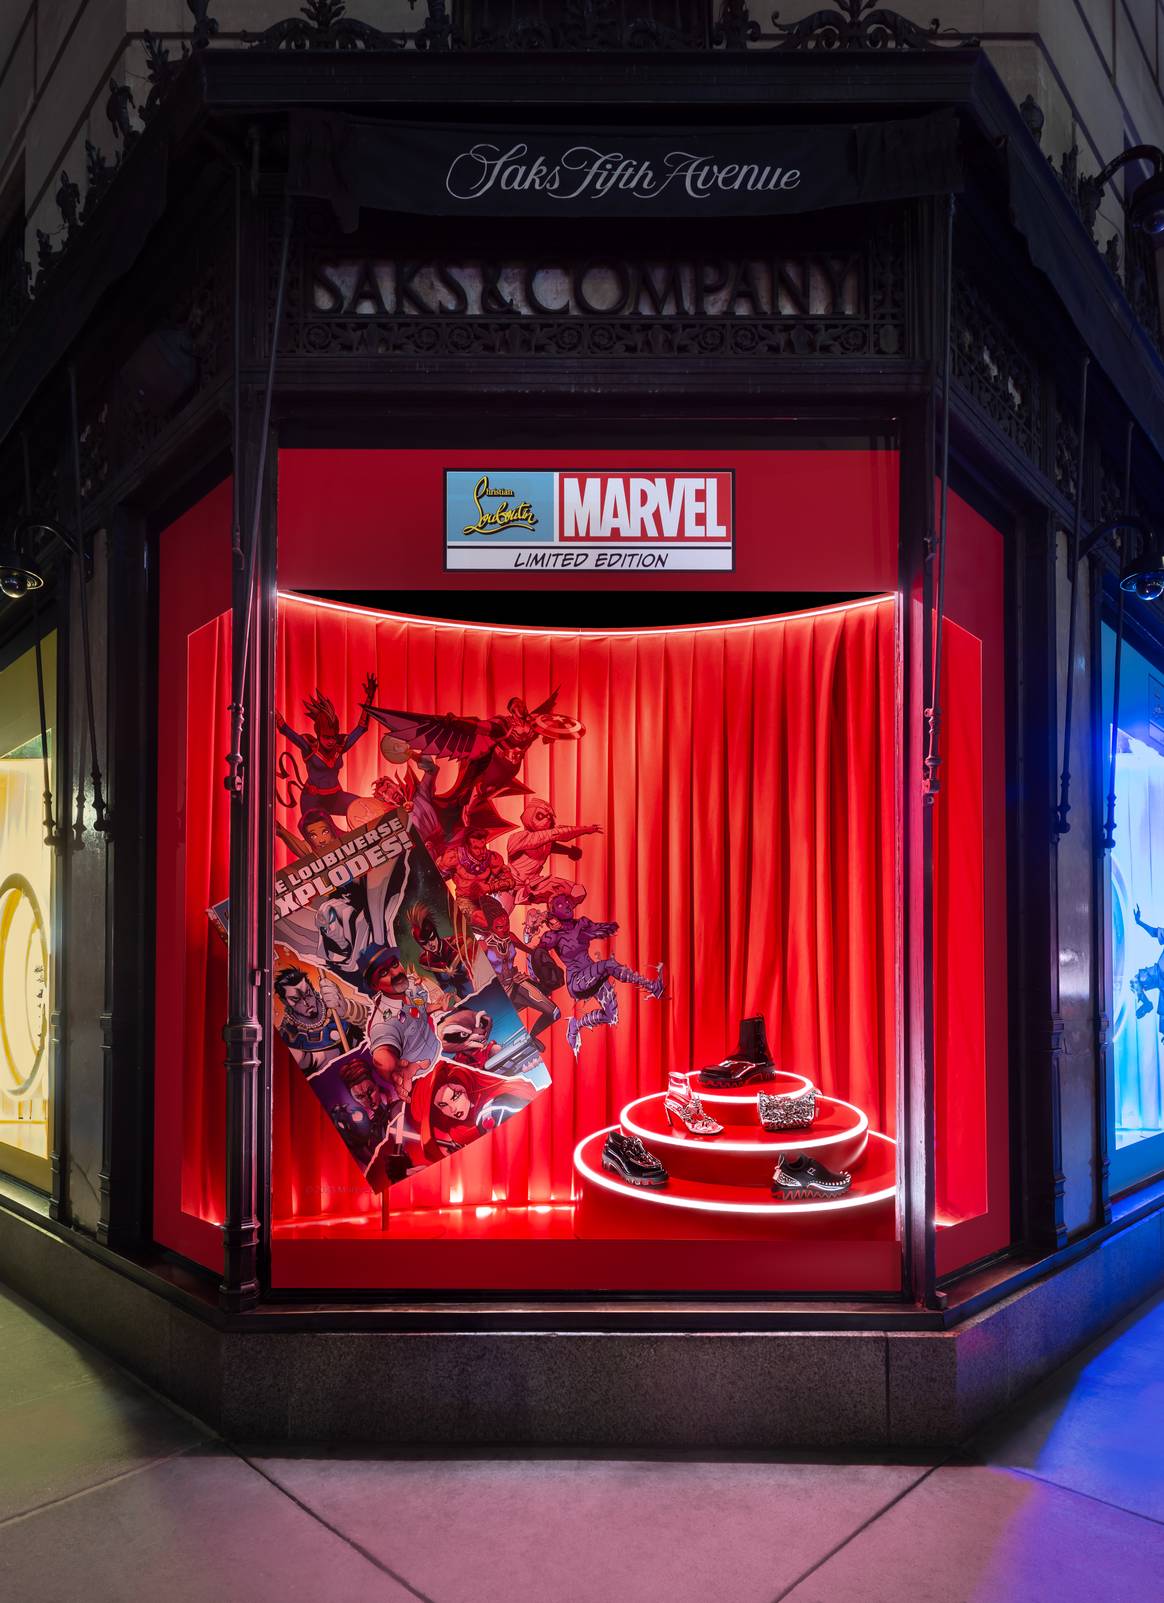 Christian Louboutin x Marvel capsule collection window at Saks in New York